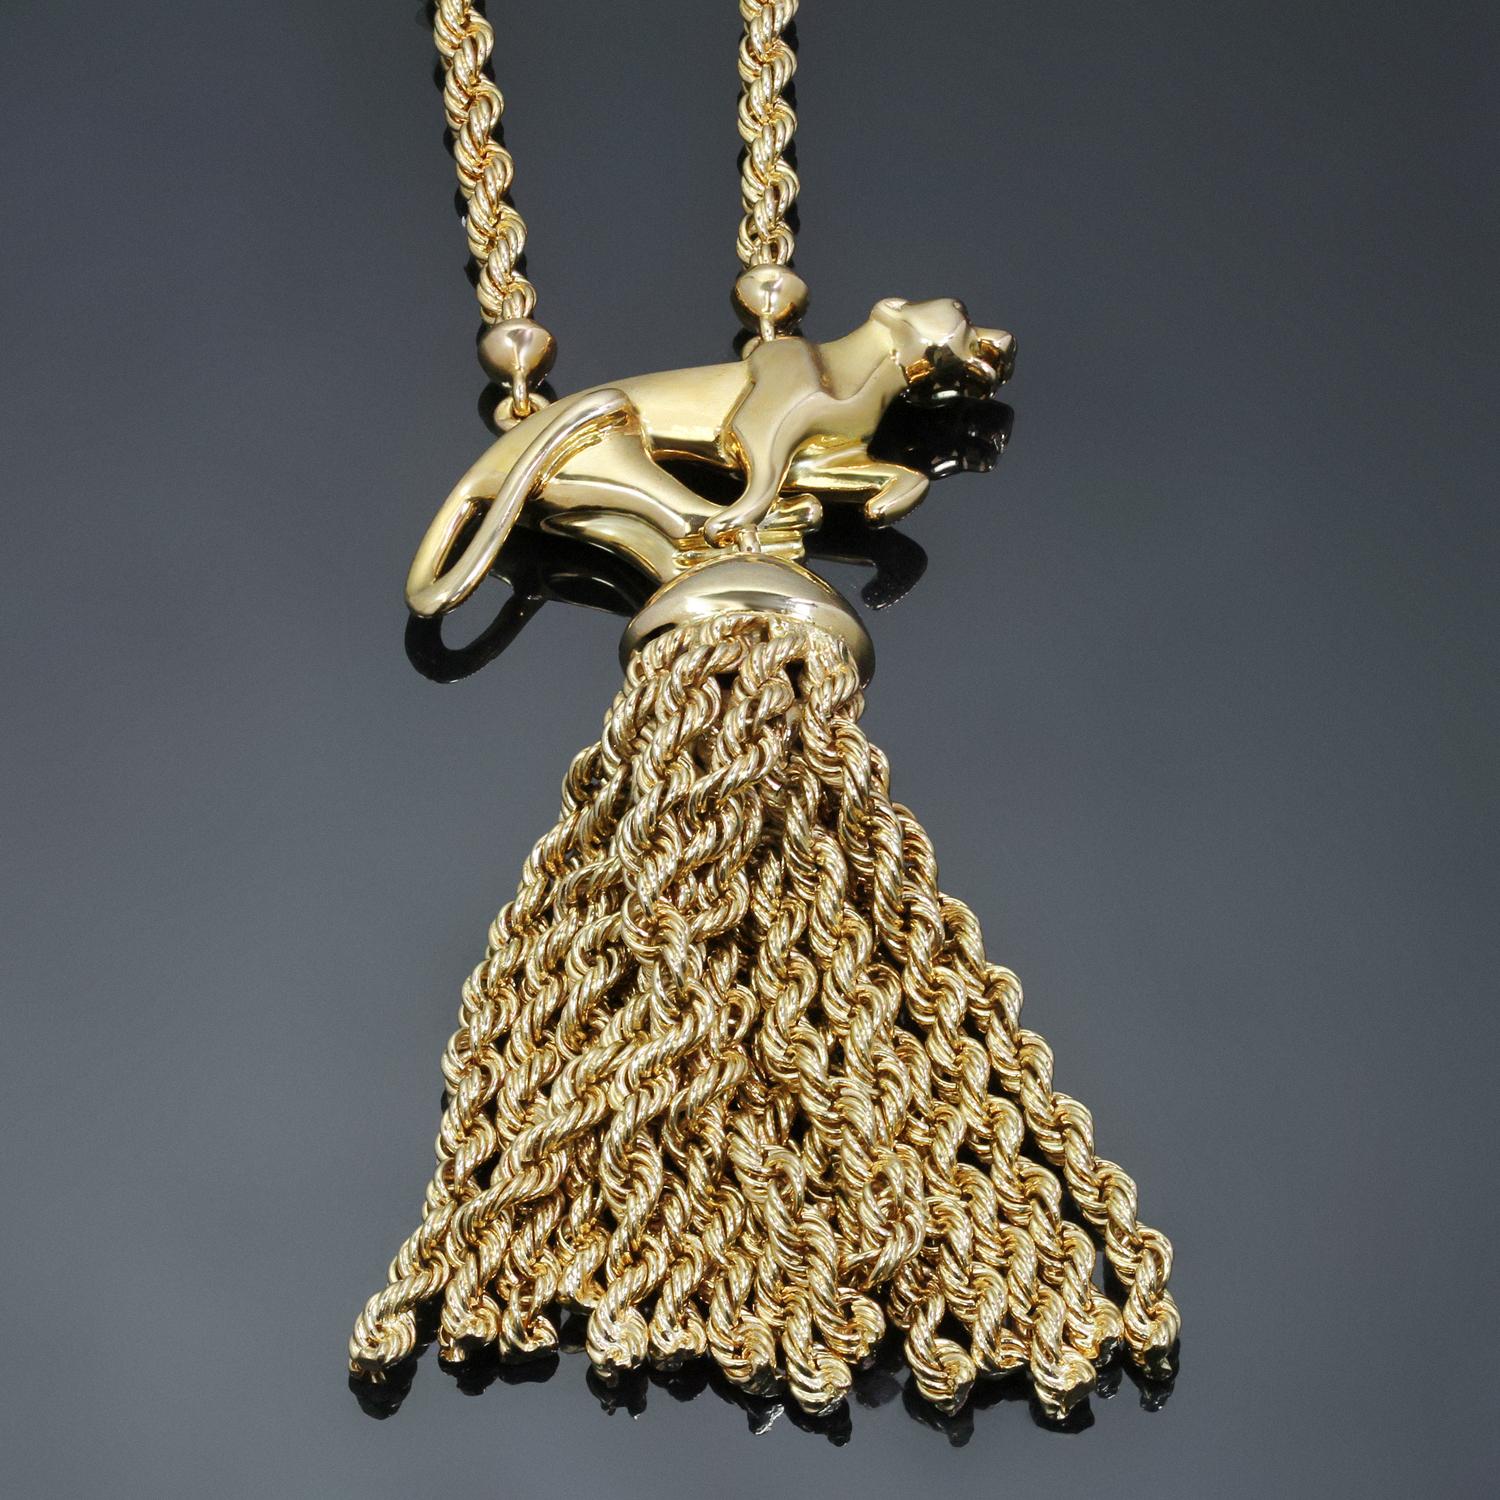 This gorgeous rare Cartier necklace features a long chain and an iconic running panther pendant with a tassel crafted in 18k yellow gold. Made in France circa 1980s. Measurements: 21